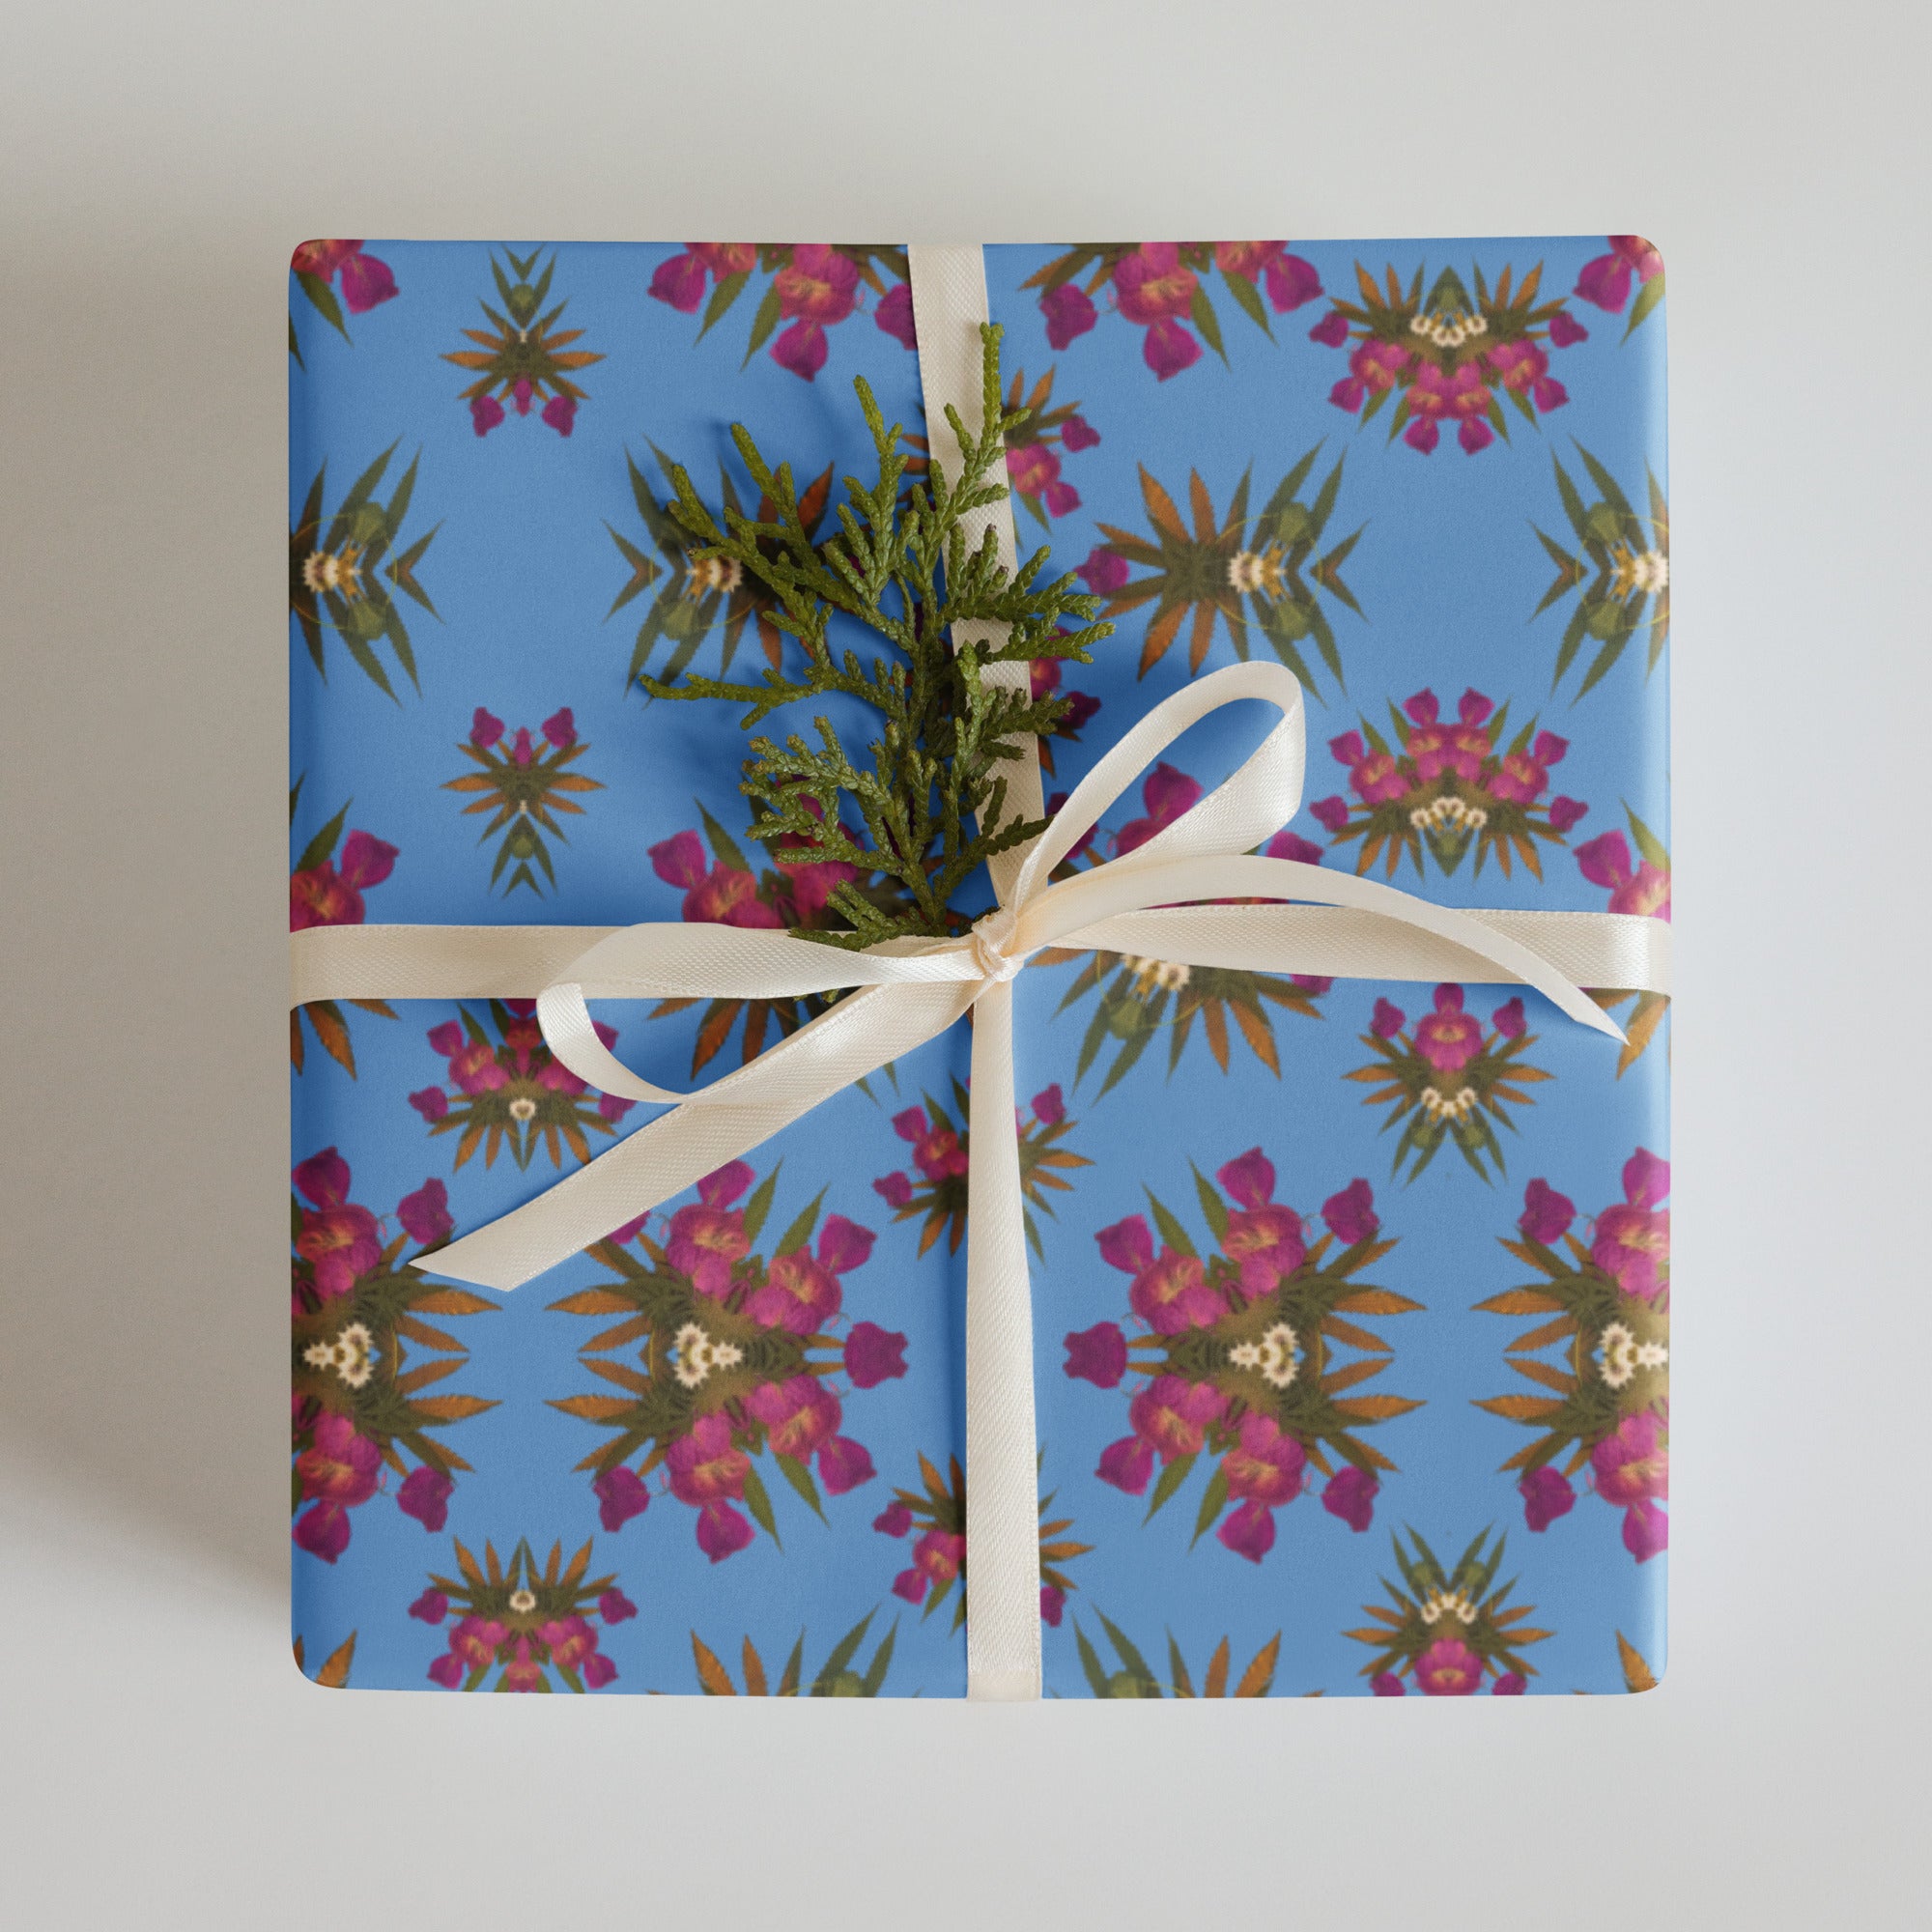 Viral (Sky) Wrapping paper sheets